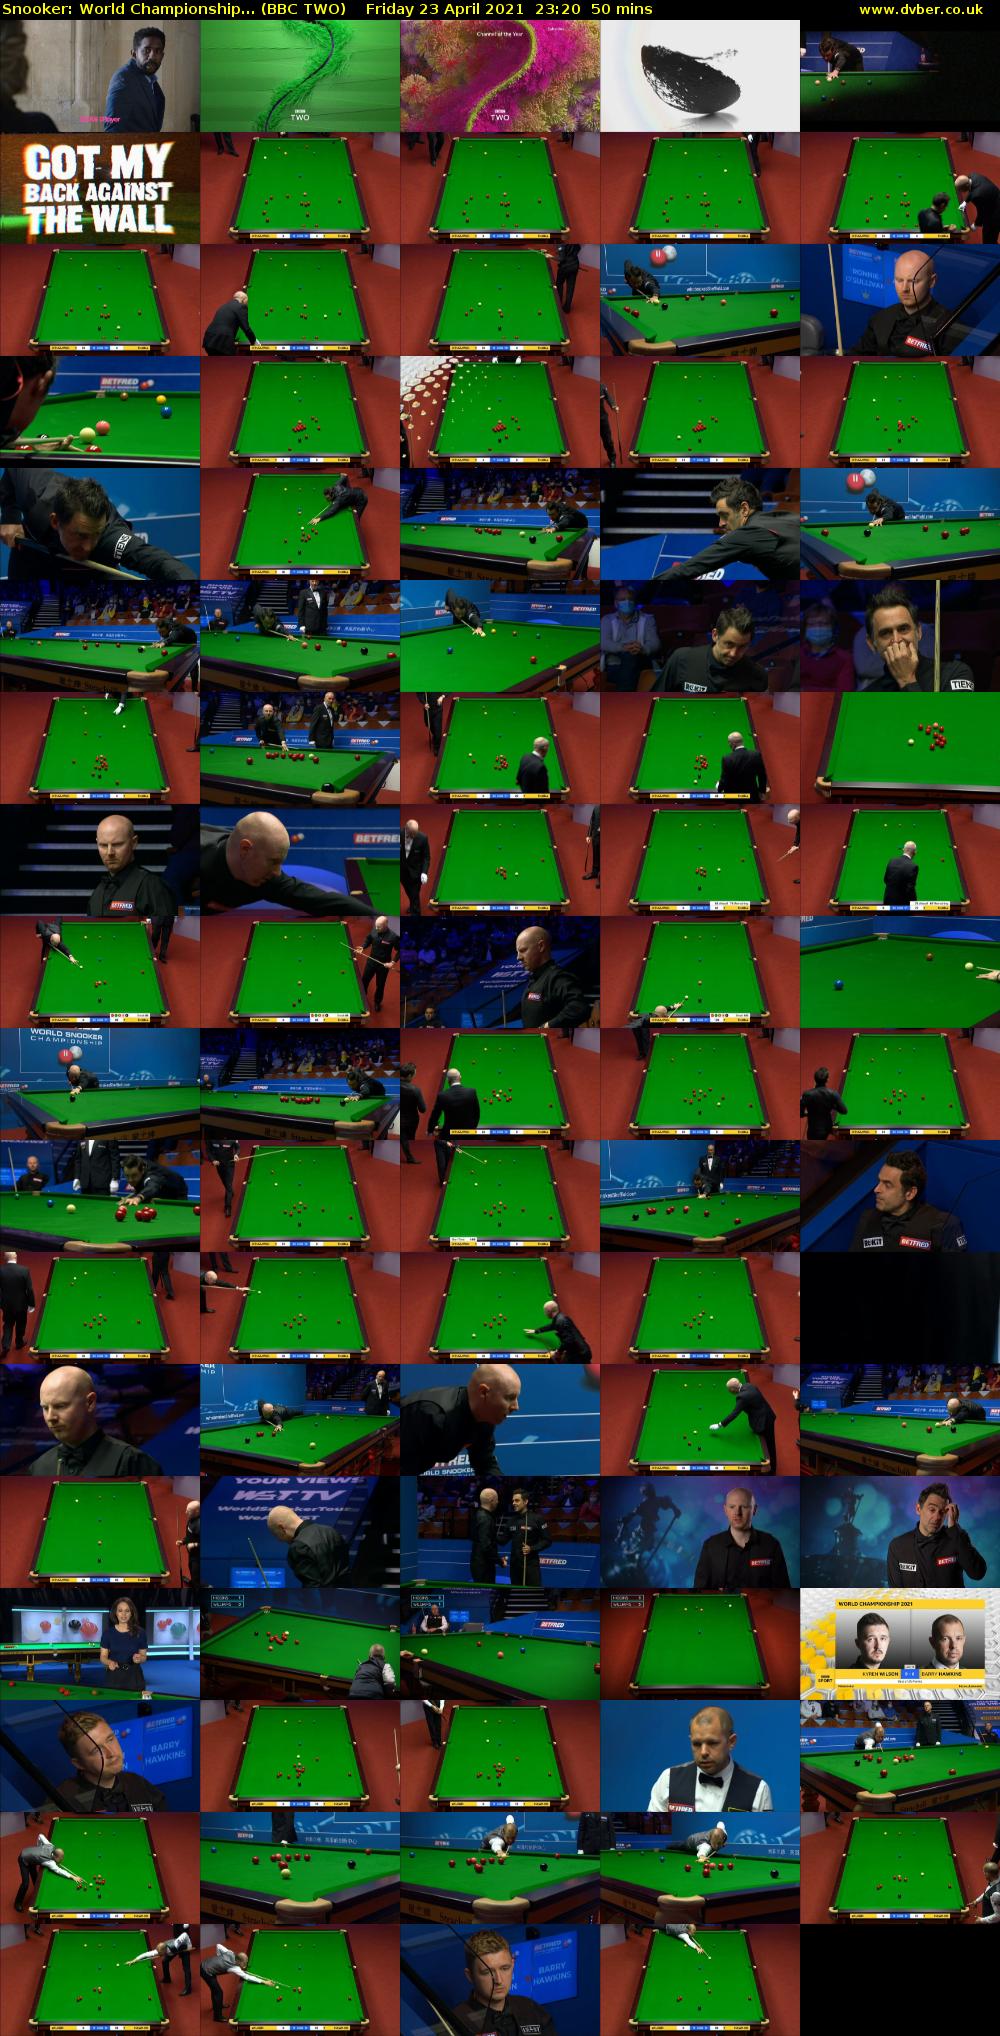 Snooker: World Championship... (BBC TWO) Friday 23 April 2021 23:20 - 00:10